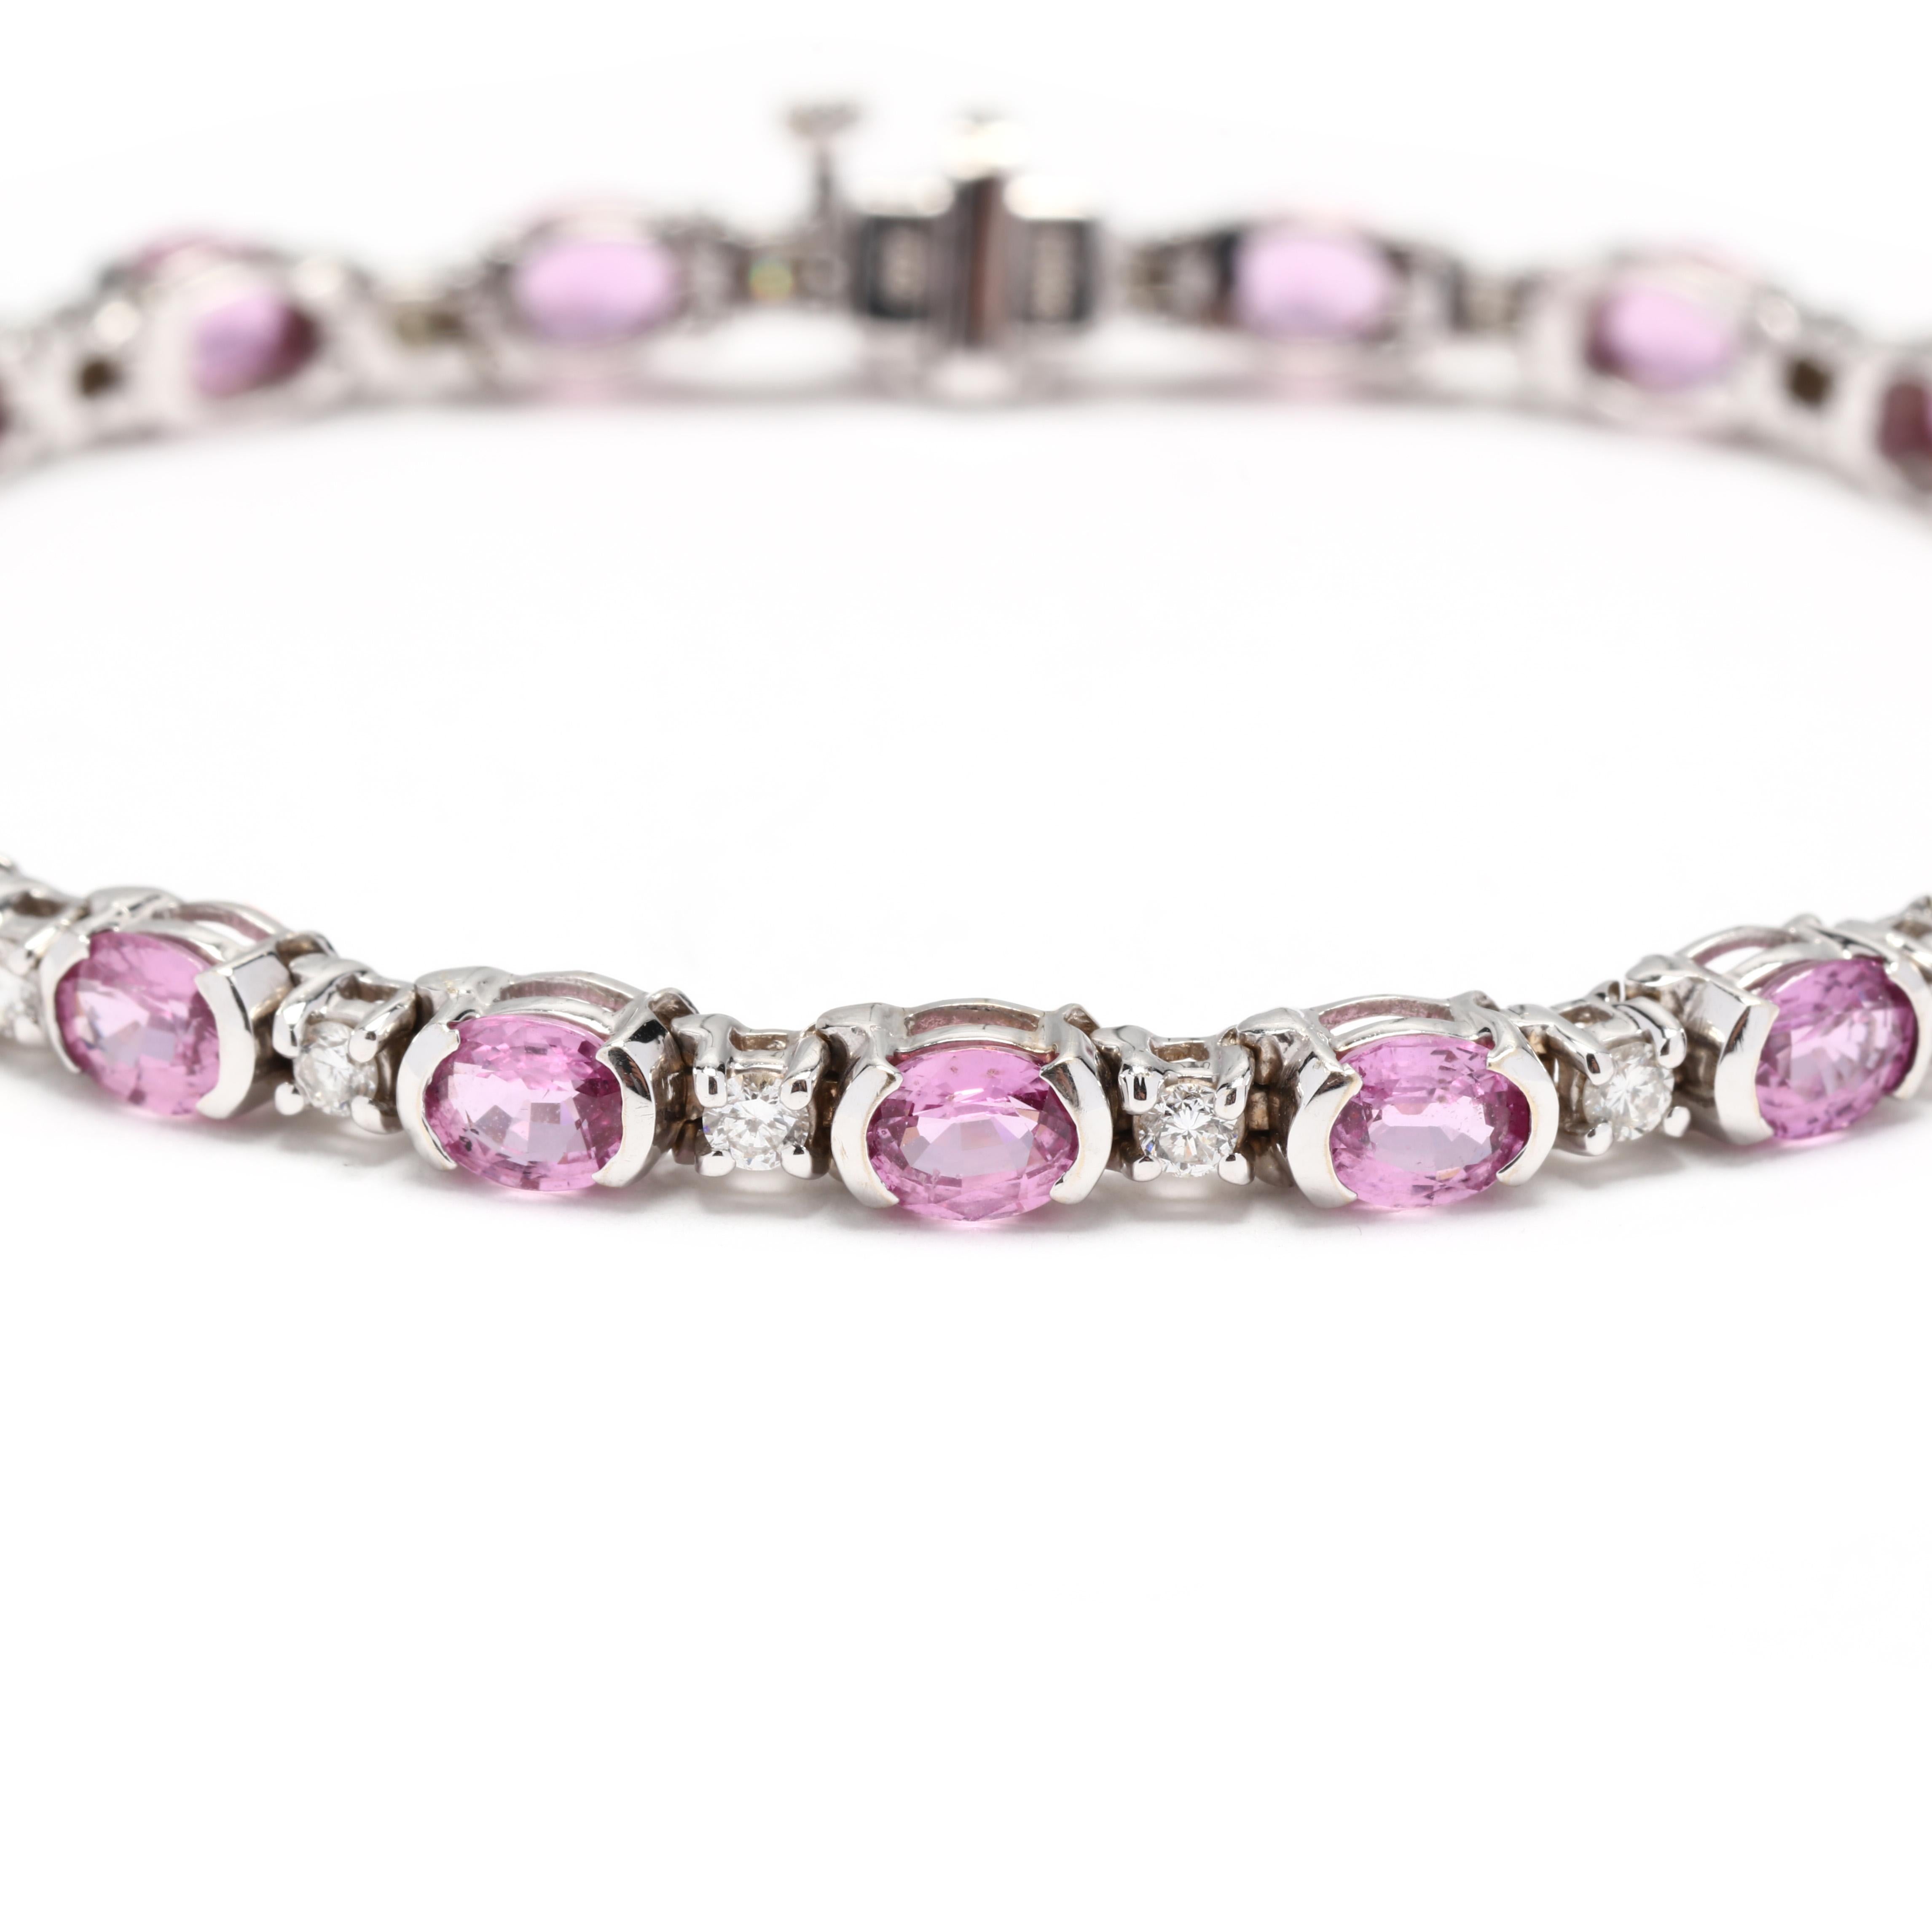 A vintage 18 karat white gold pink sapphire and diamond tennis bracelet. This stackable bracelet features alternating half bezel set, oval cut pink sapphires weighing approximately 14 total carats and prong set, round brilliant cut diamonds weighing